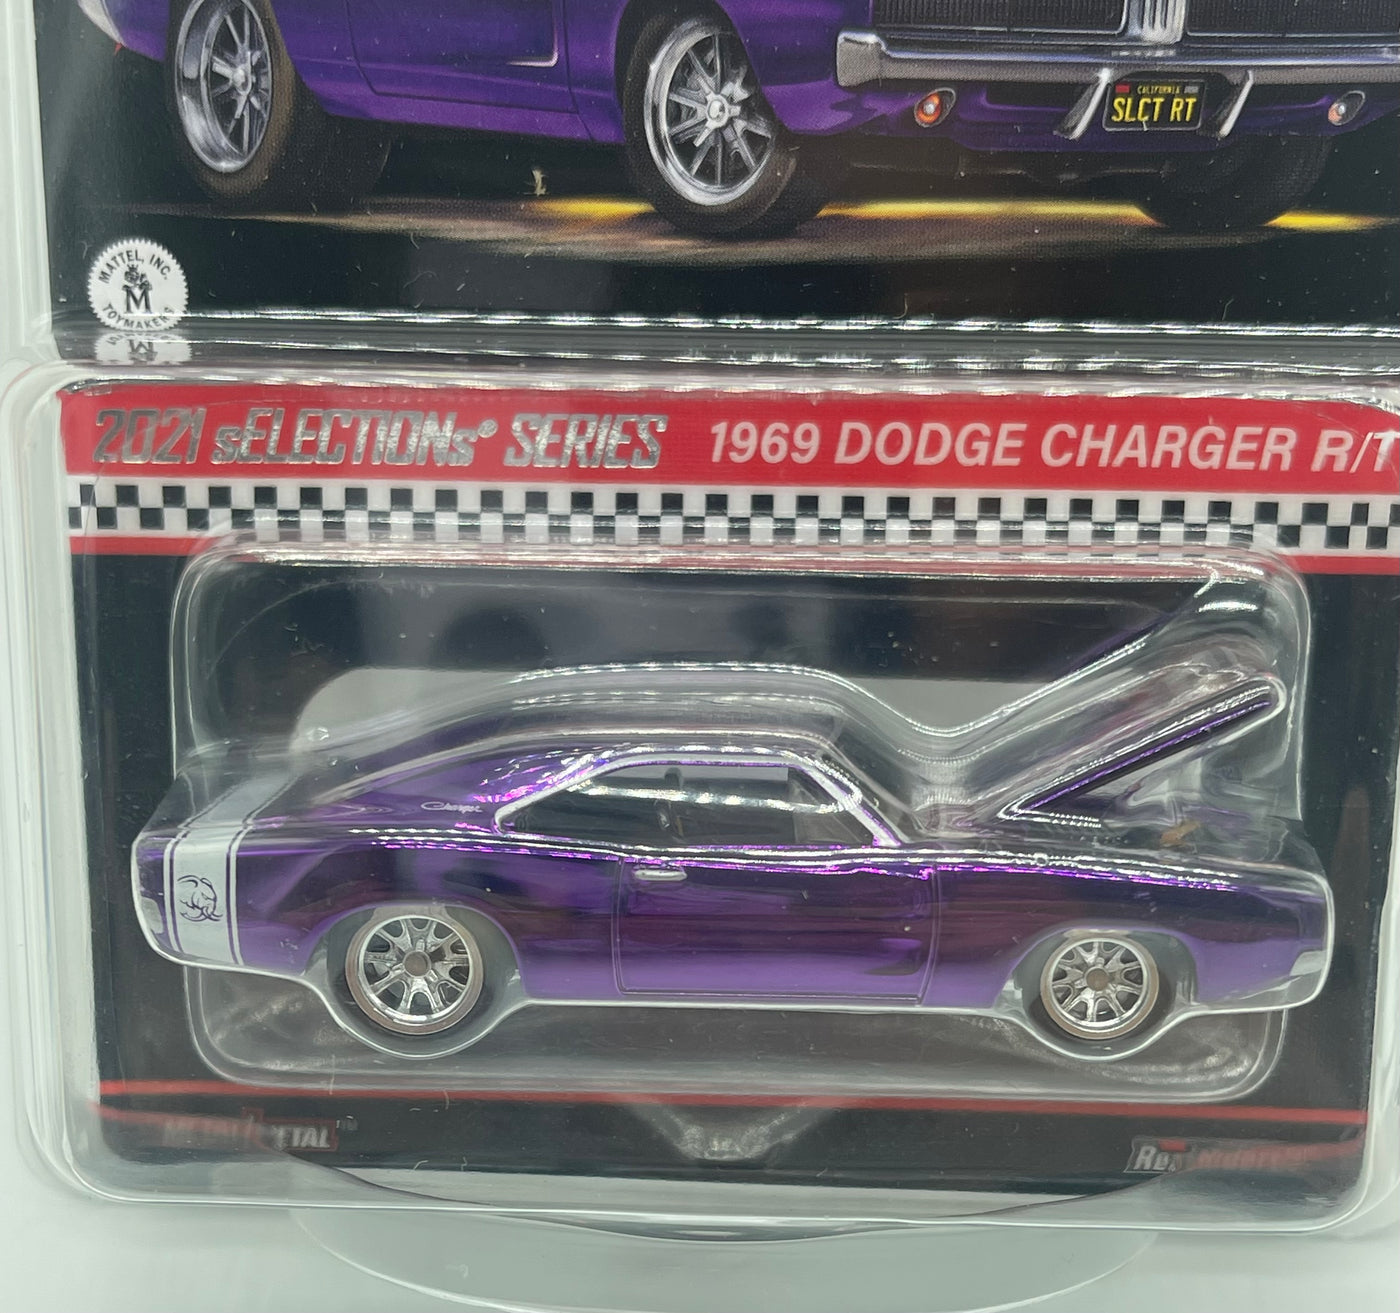 Mattel Collectors 2021 sElections Series Hot Wheels 1969 Dodge Charger R/T New